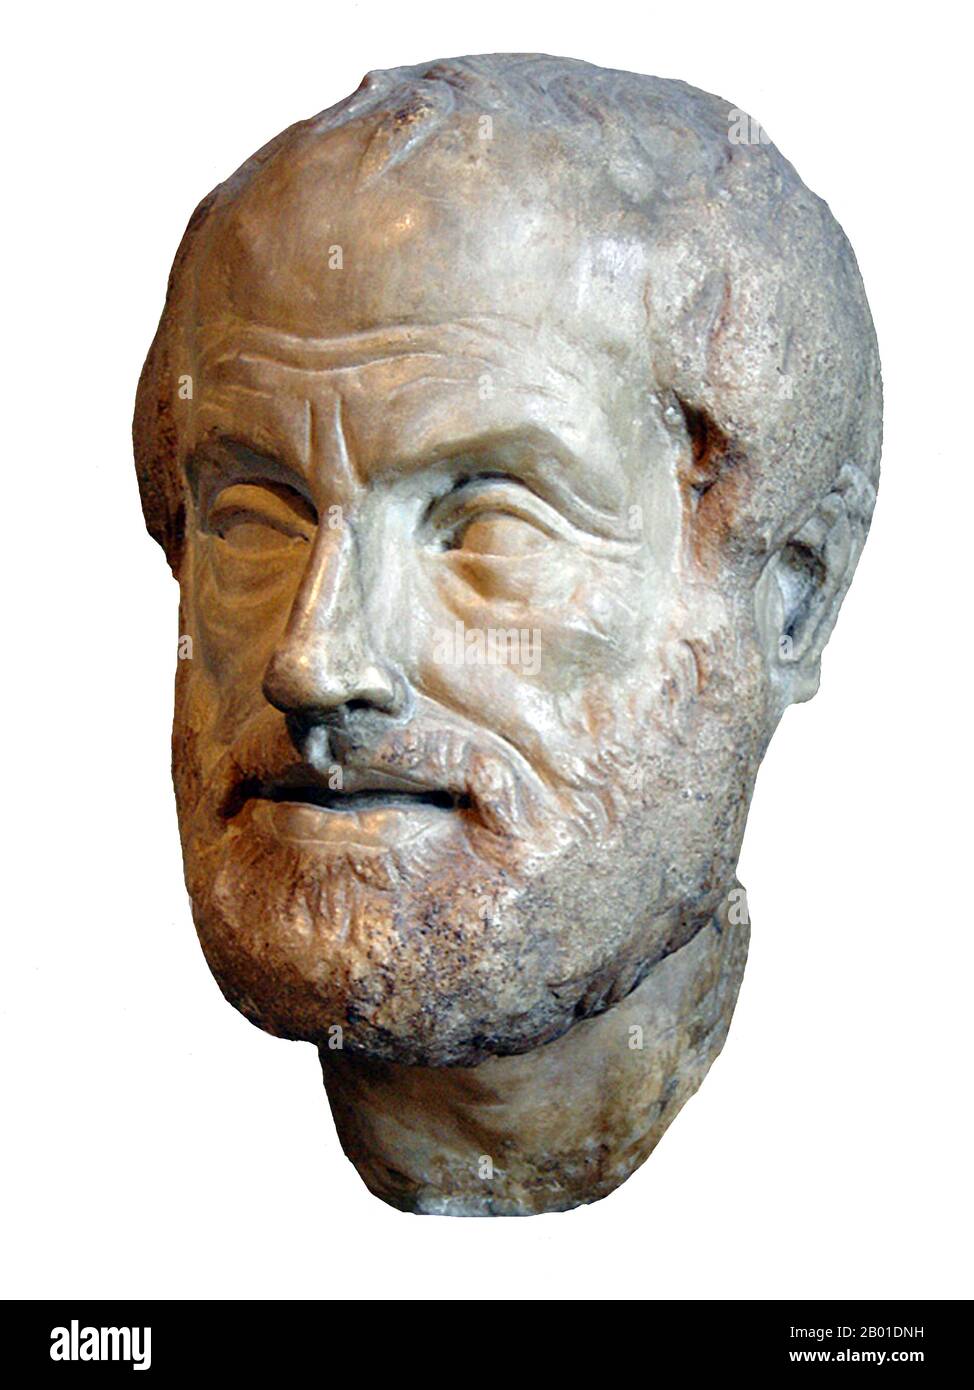 Greece/Rome: Portrait of Aristotle (384-322 BCE) in pentelic marble, copy from the Imperial Period (1st or 2nd century CE) of a lost bronze sculpture made by Lysippos of Sicyon (c. 390-300 BCE). Photo by Eric Gaba/Sting (CC BY-SA 2.5 License).  Aristotle (Greek: Ἀριστοτέλης, Aristotélēs) was a Greek philosopher, a student of Plato and teacher of Alexander the Great.  His writings cover many subjects, including physics, metaphysics, poetry, theater, music, logic, rhetoric, linguistics, politics, government, ethics, biology, and zoology. Stock Photo